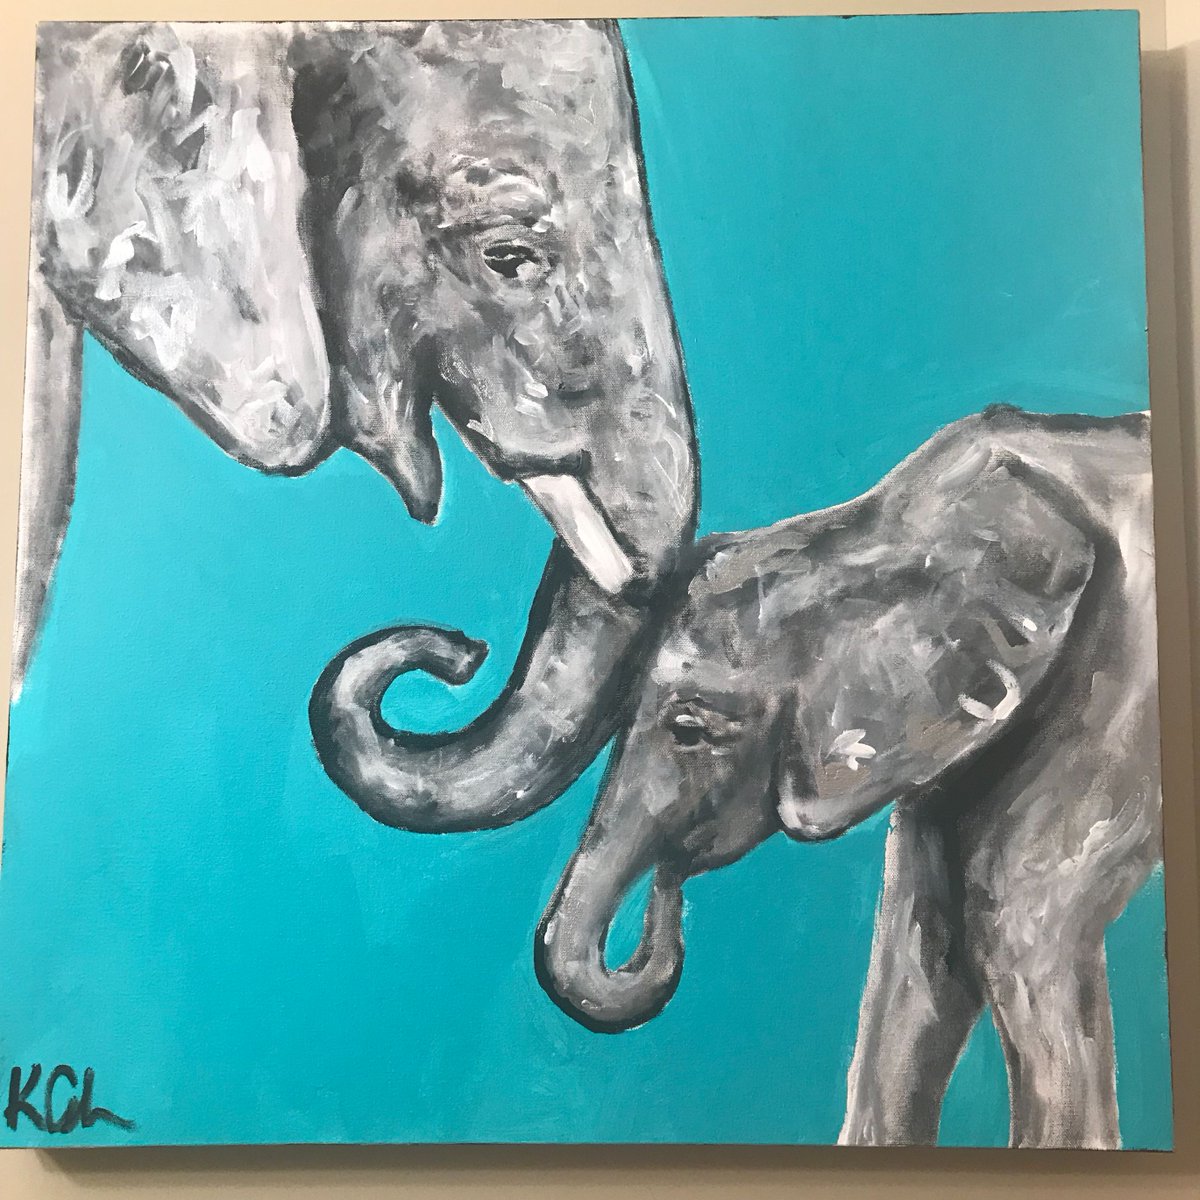 There's something about Elephants that I just LOVE!!!

What's your favourite animal?

 #elephant #elephantart #elephantpainting #elephantlover #indianelephant #yeg #yegdt #usaartist #canadianartist #yycart #fineart #canvas #interiordecor #interiordecore #kelownaartist #kelownaart